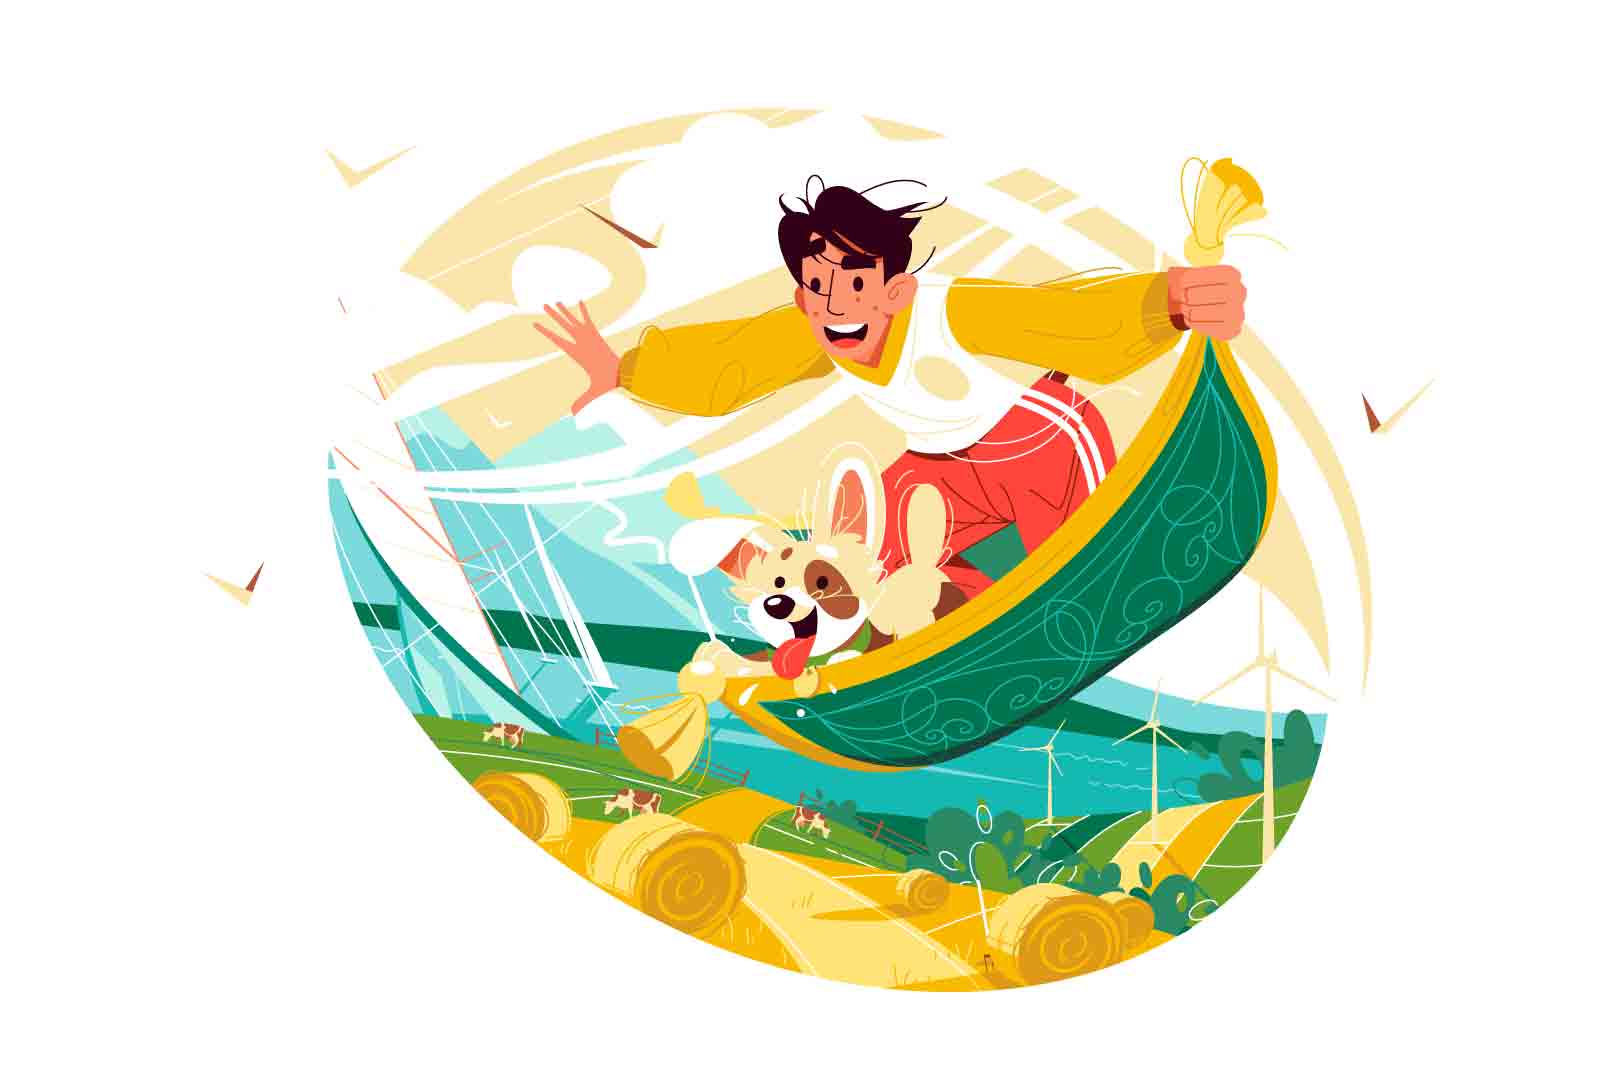 Male character with dog flying on magic carpet vector illustration. Magic rug fly over nature landscapes flat style. Travel, explore concept